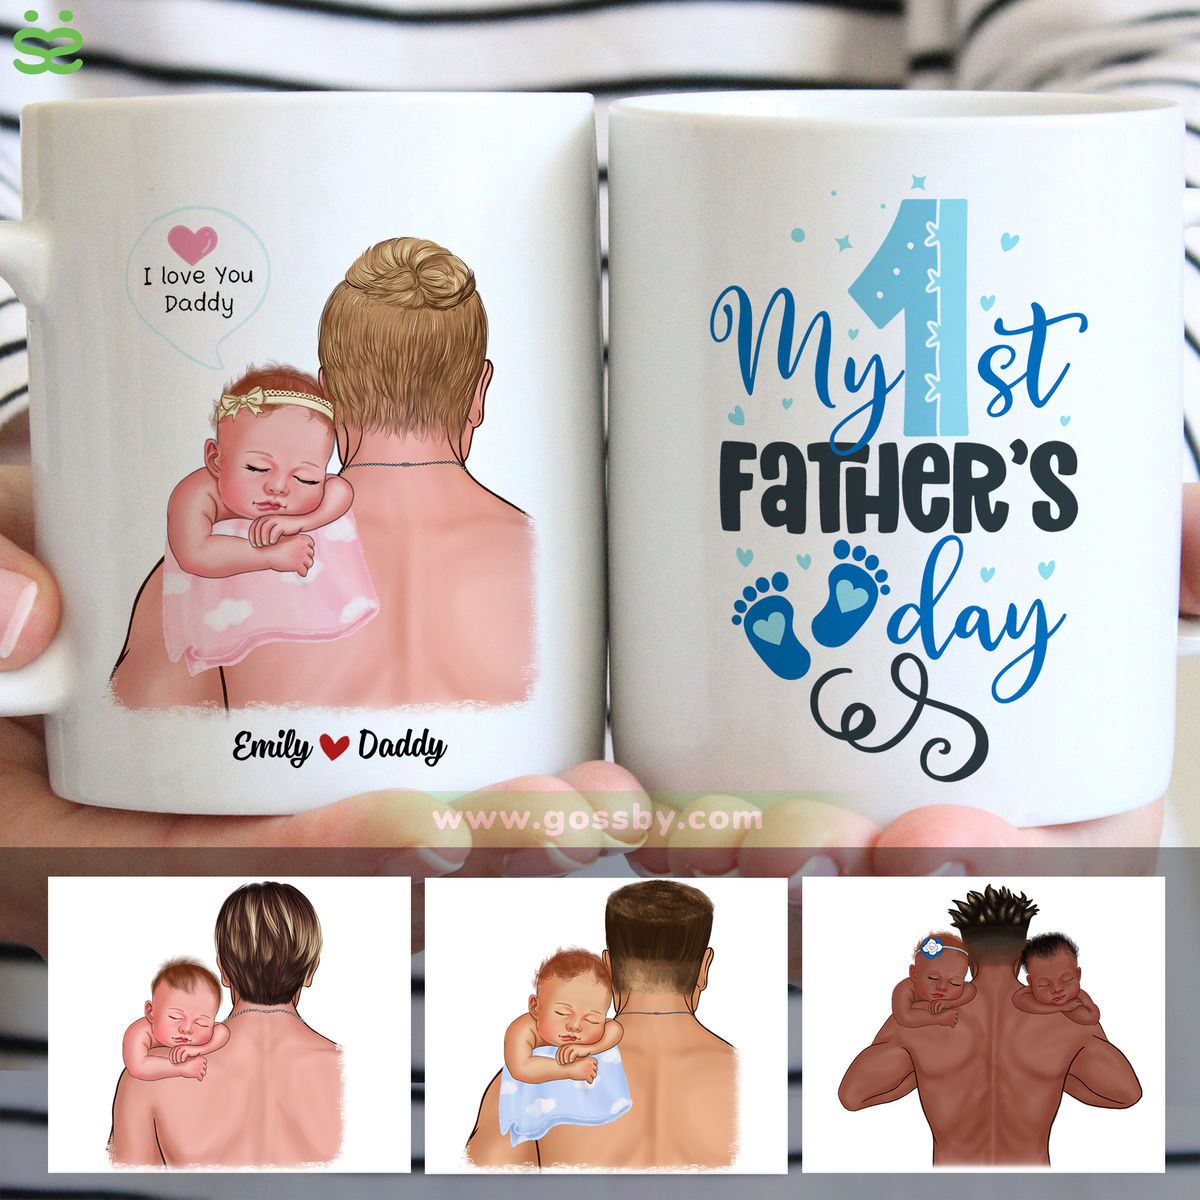 1st Father's Day - My 1st Father's Day (v1) | Personalized Mugs | Gossby